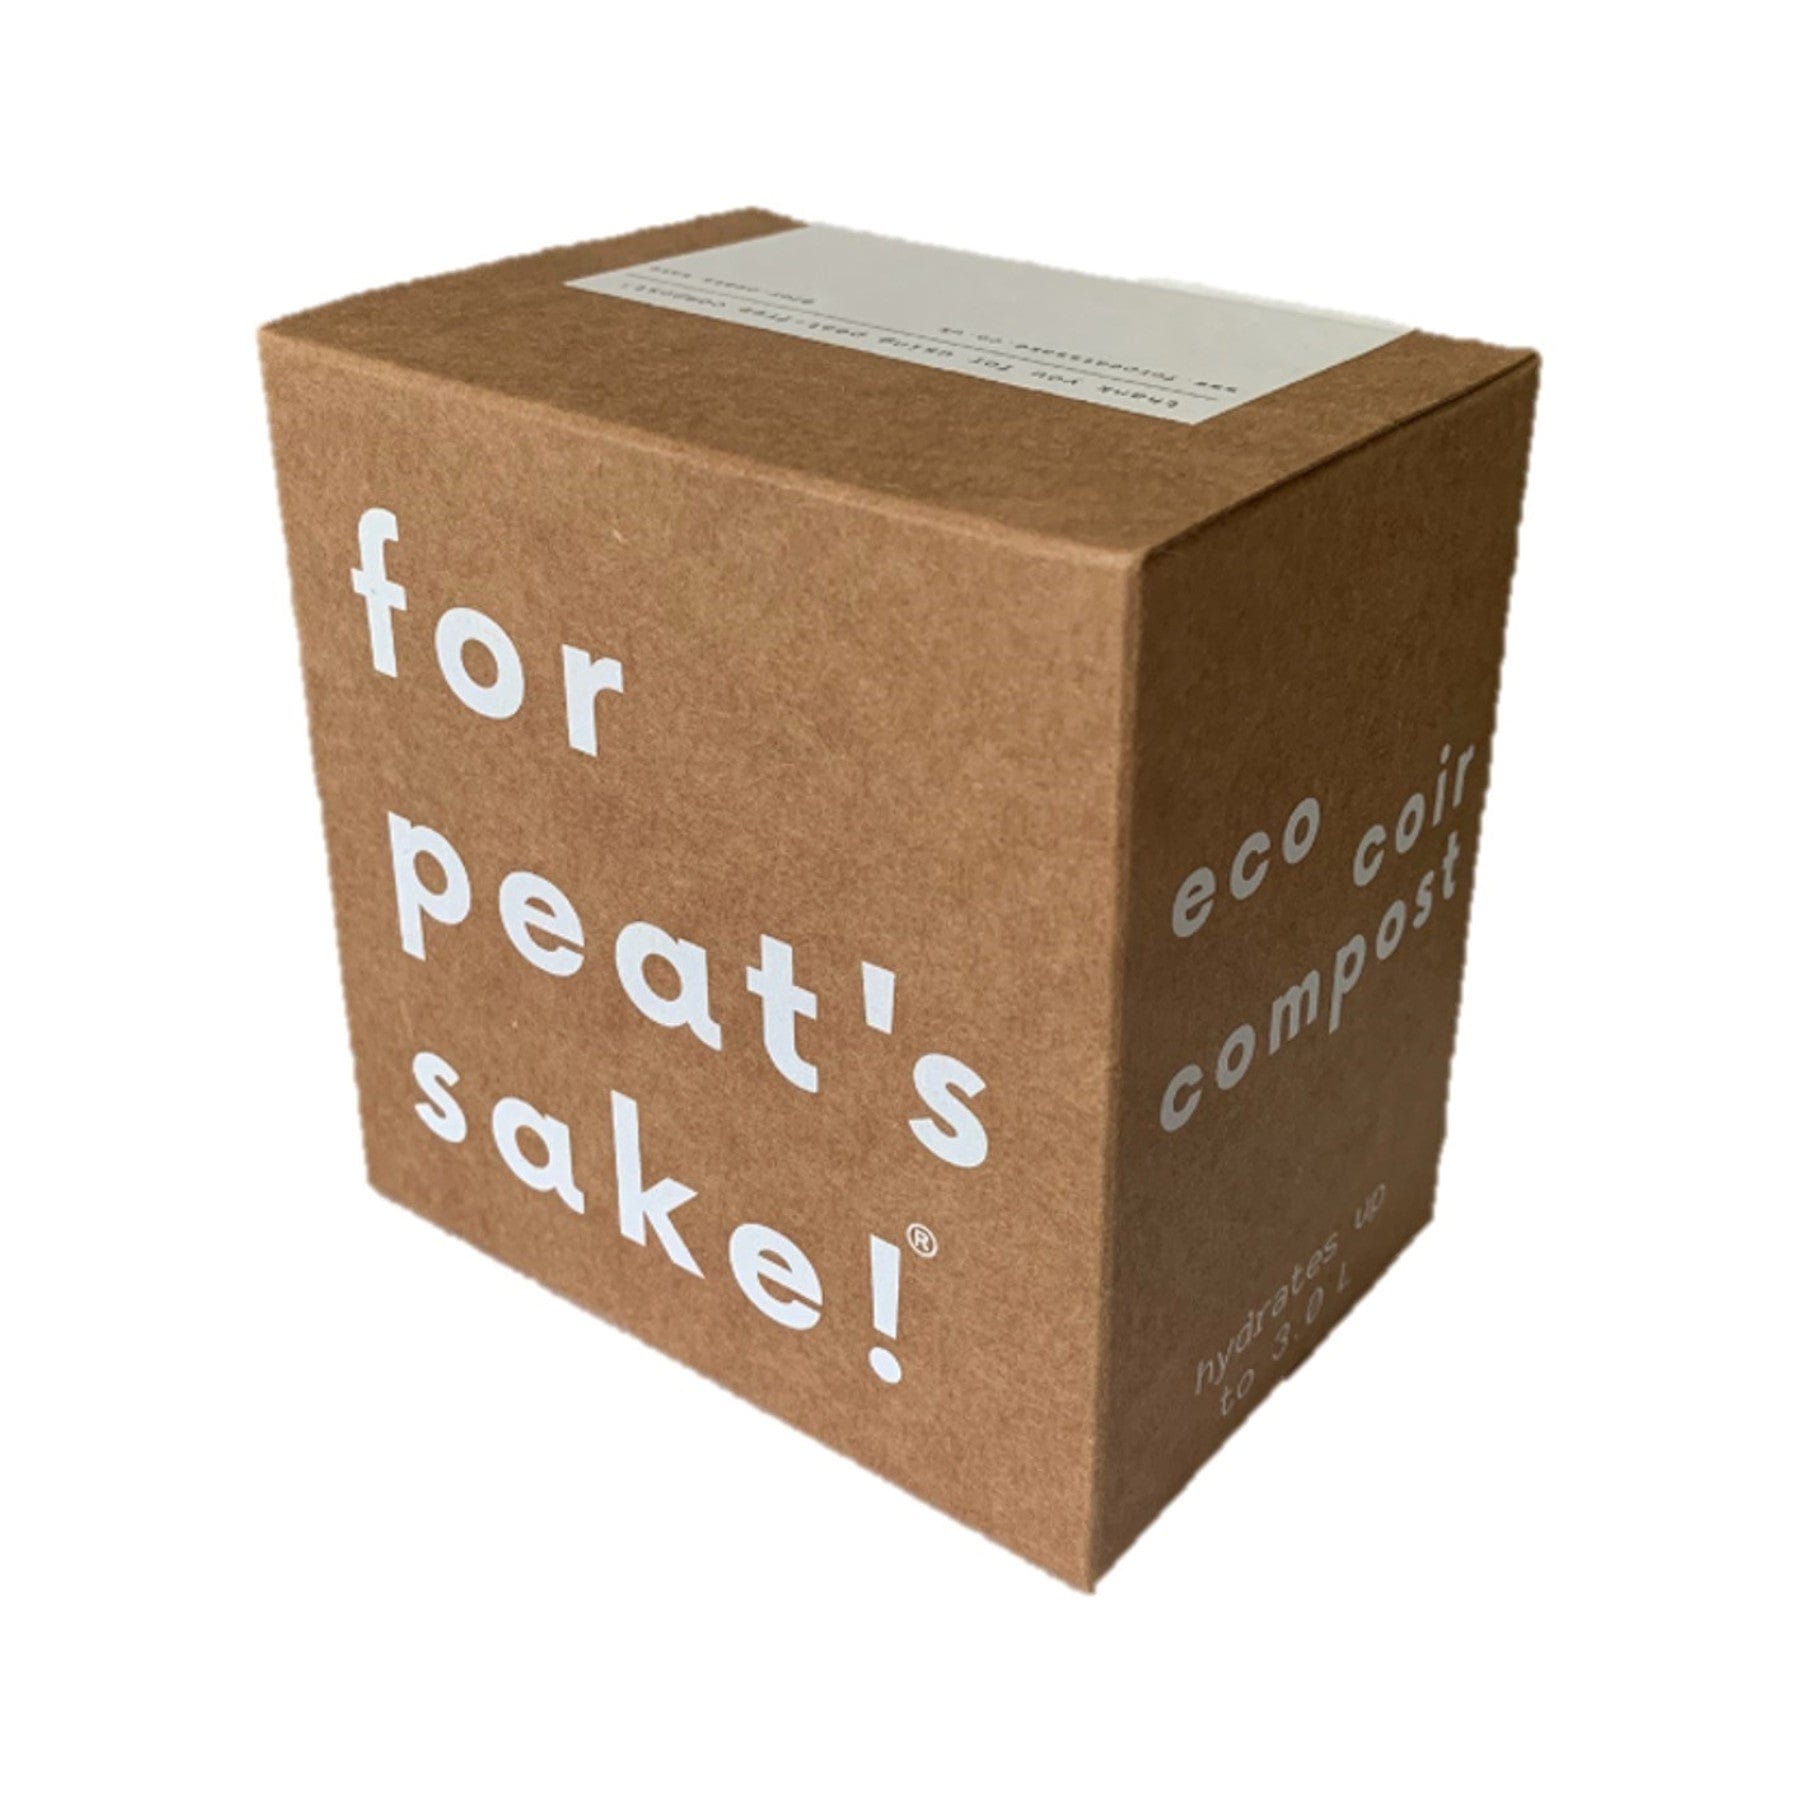 Brown cardboard box with text "for peat's sake! eco coir compost" indicating sustainable gardening product packaging on a white background.